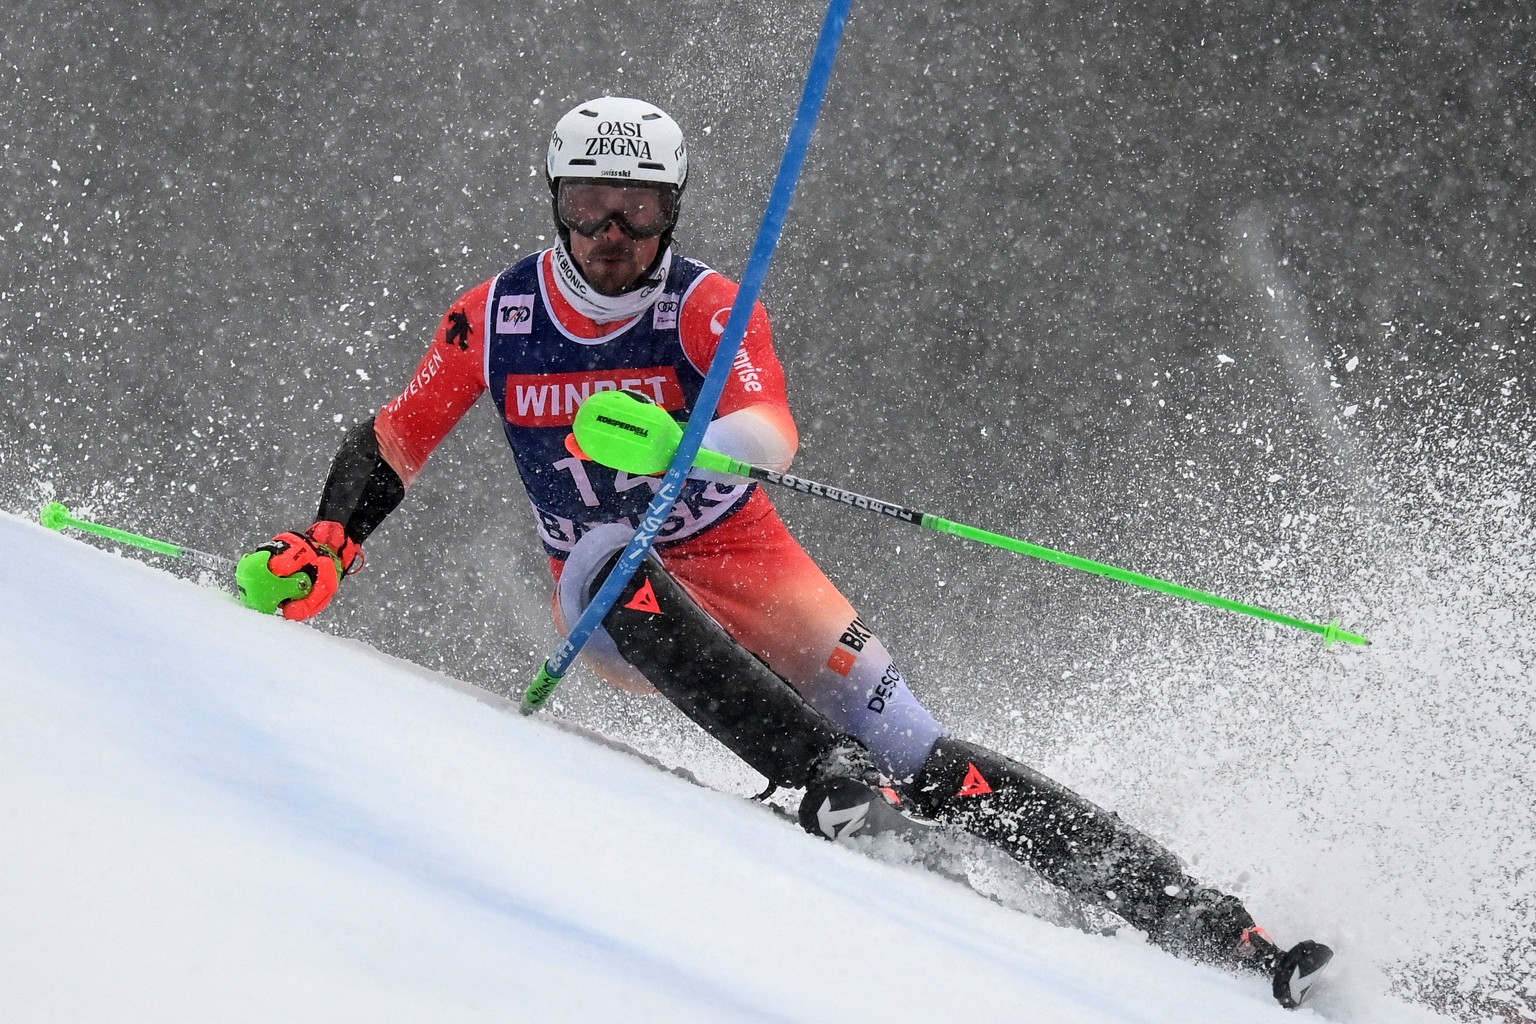 epa11144205 Marc Rochat of Switzerland in action during the first run in slalom race at the FIS Alpine Skiing World Cup event in Bansko, Bulgaria, 11 February 2024. EPA/VASSIL DONEV